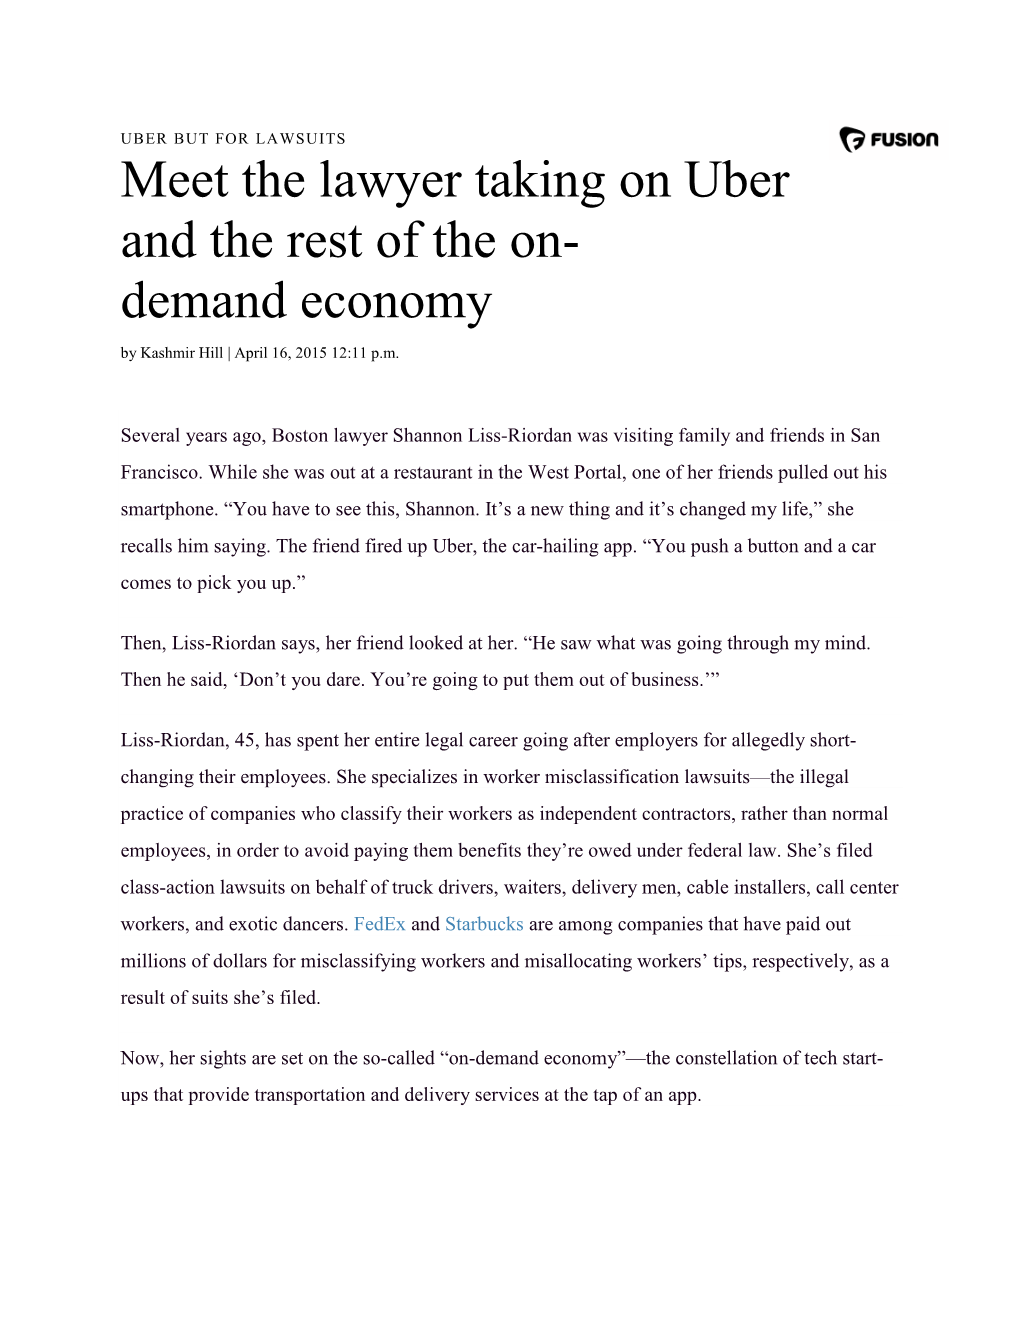 Meet the Lawyer Taking on Uber and the Rest of the On- Demand Economy by Kashmir Hill | April 16, 2015 12:11 P.M